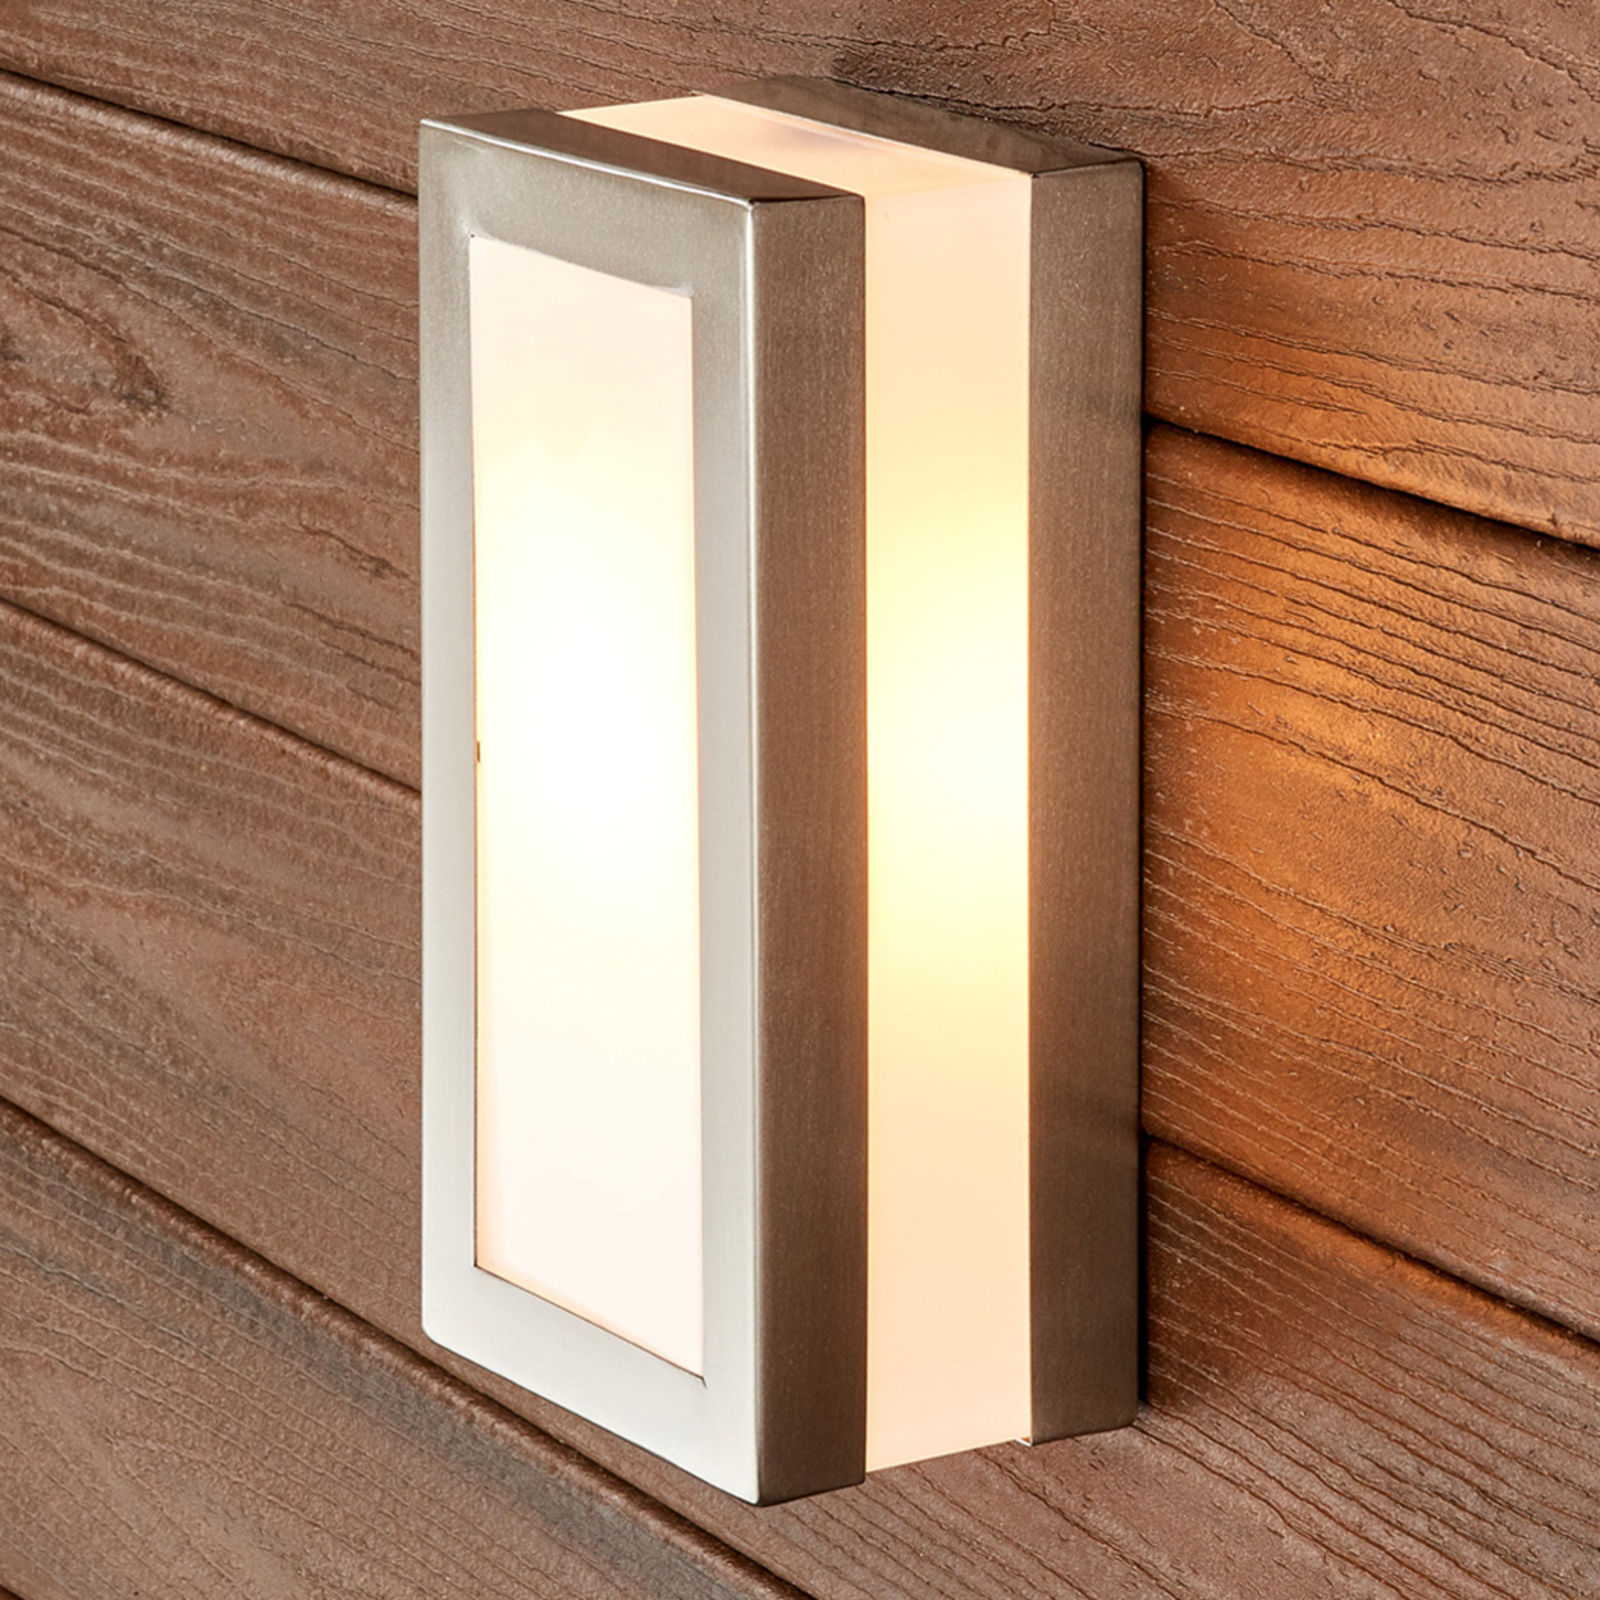 Angular stainless steel outdoor wall lamp Odis